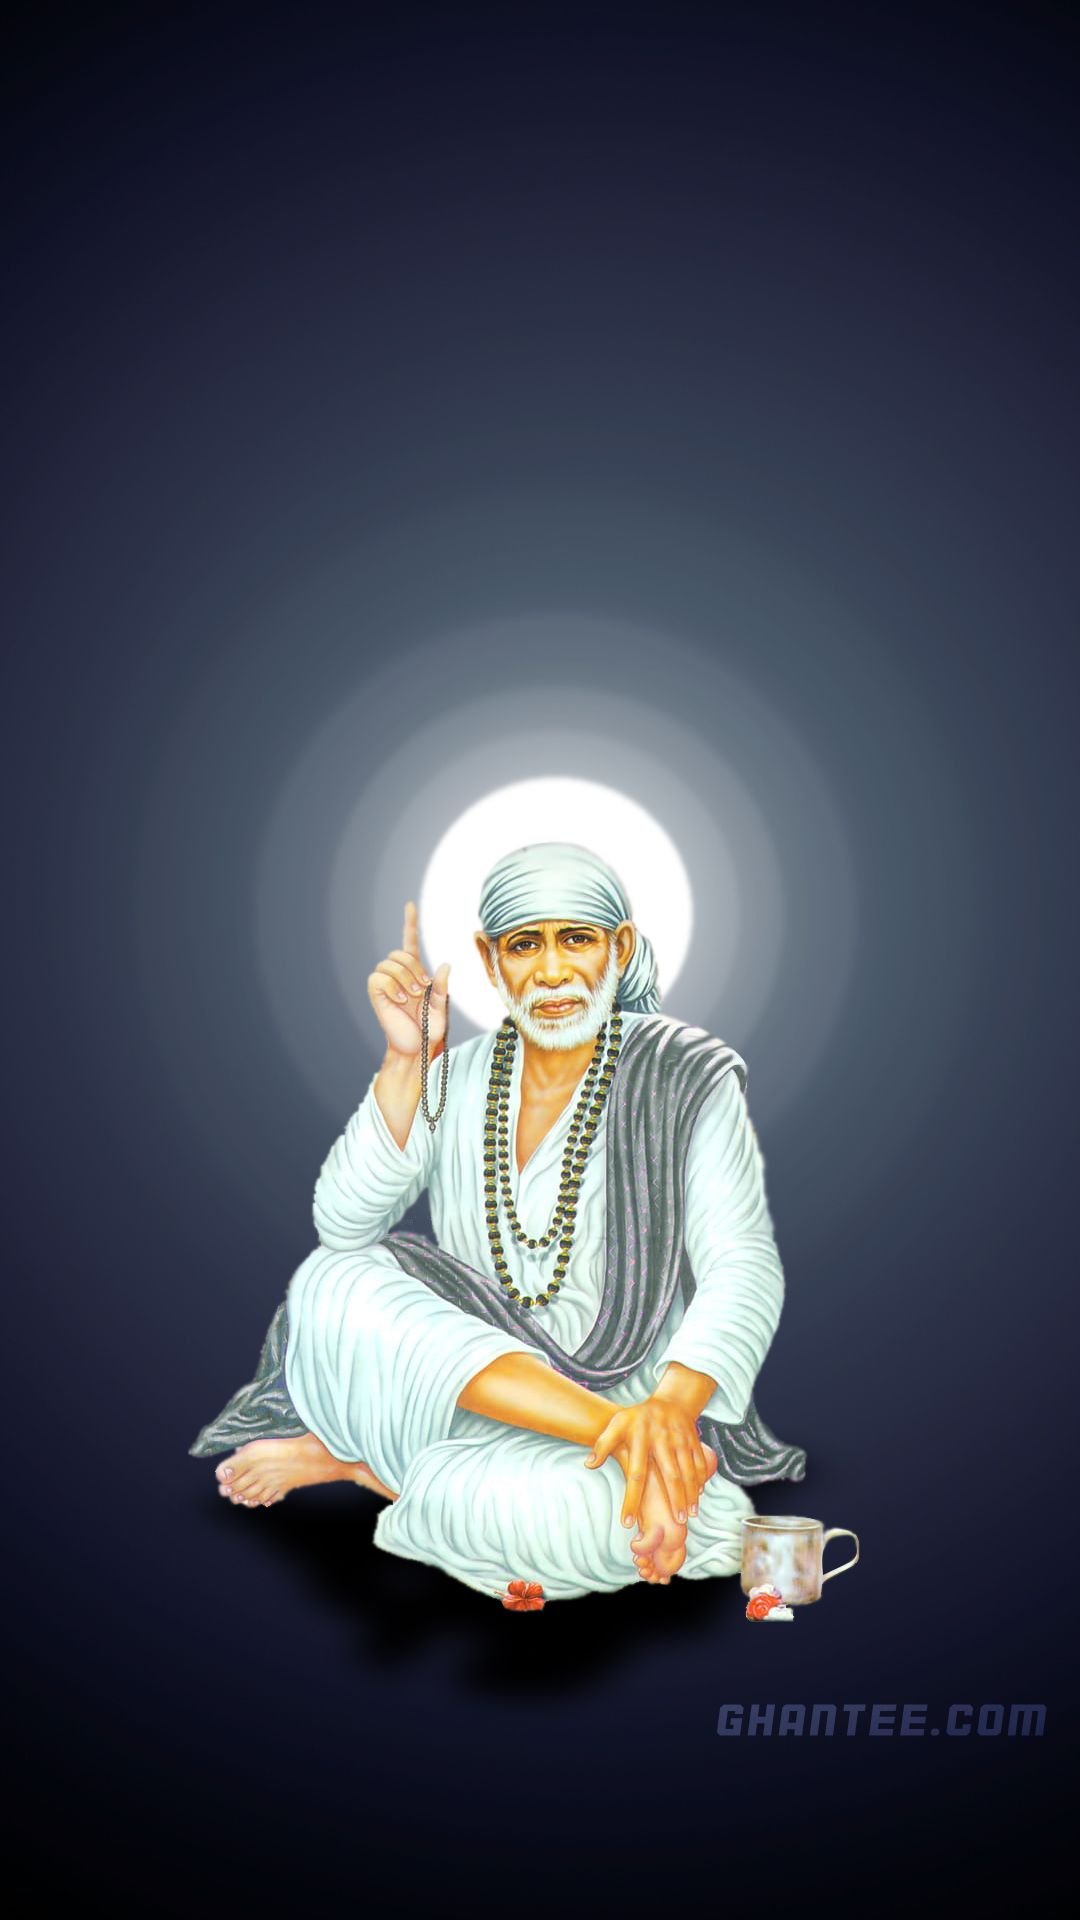 Lord Sai Baba Images For Screen Savers